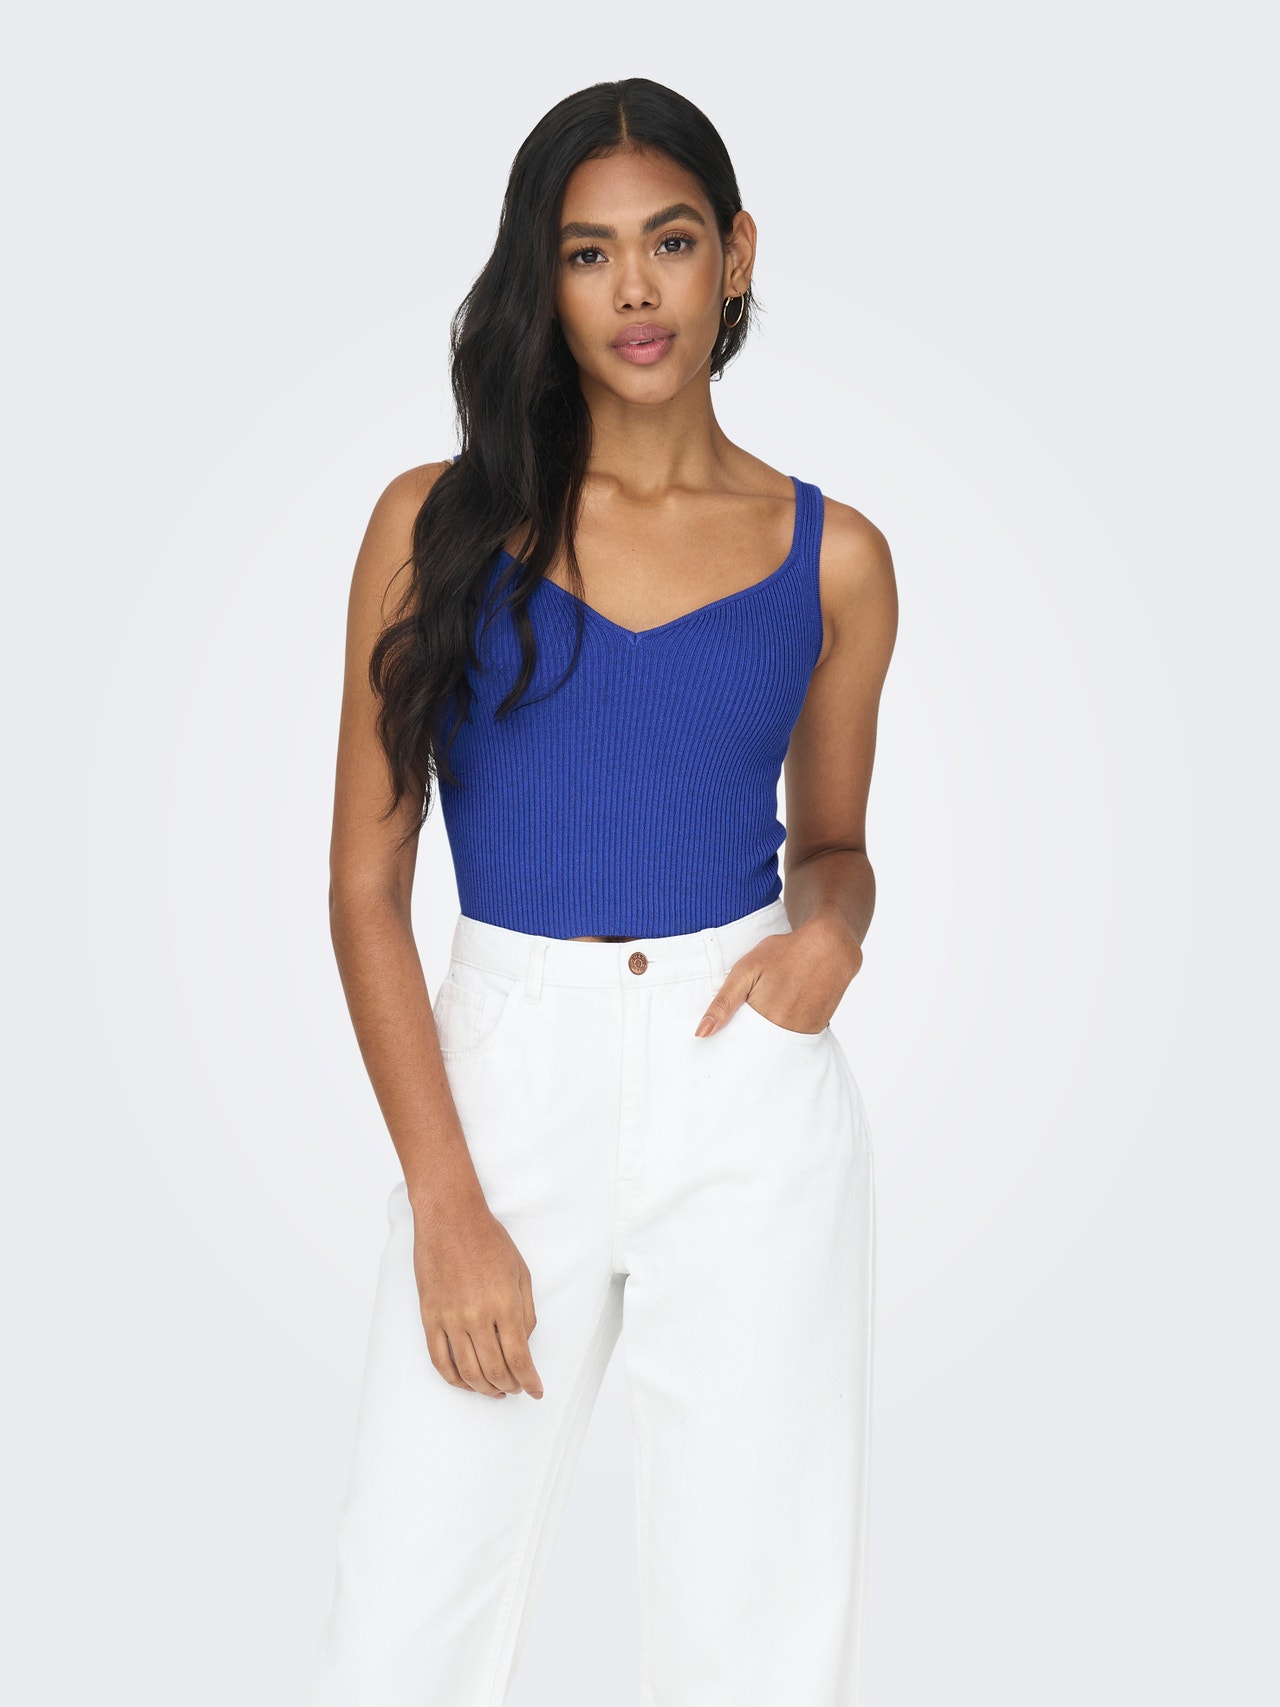 ONLY Square Neck Top -Dazzling Blue - 15288496